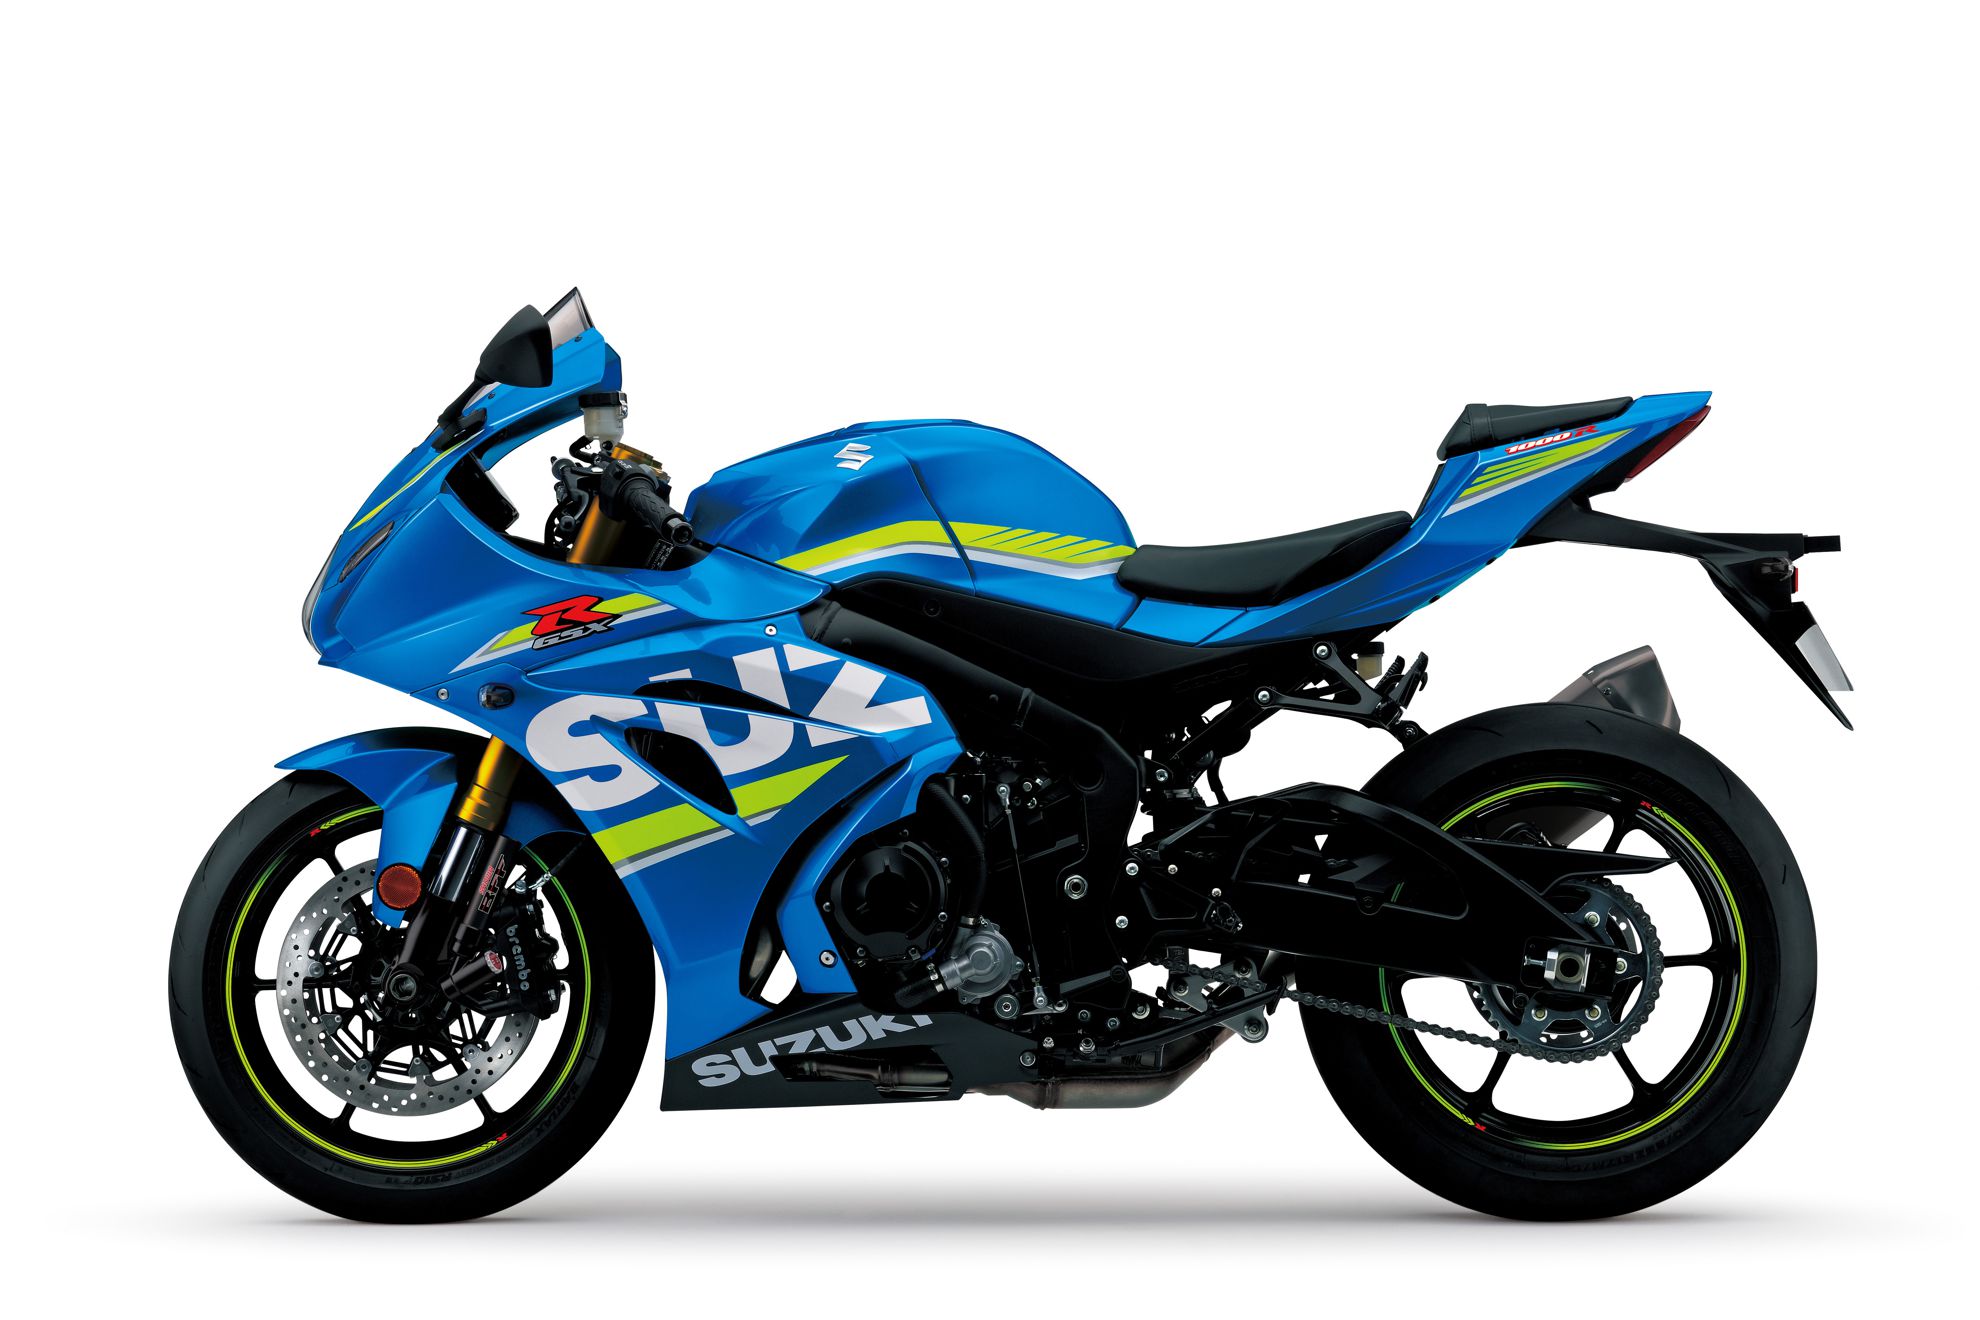 GSX-R1000 Suzuki Motorcycle expected in South Africa by end 2016